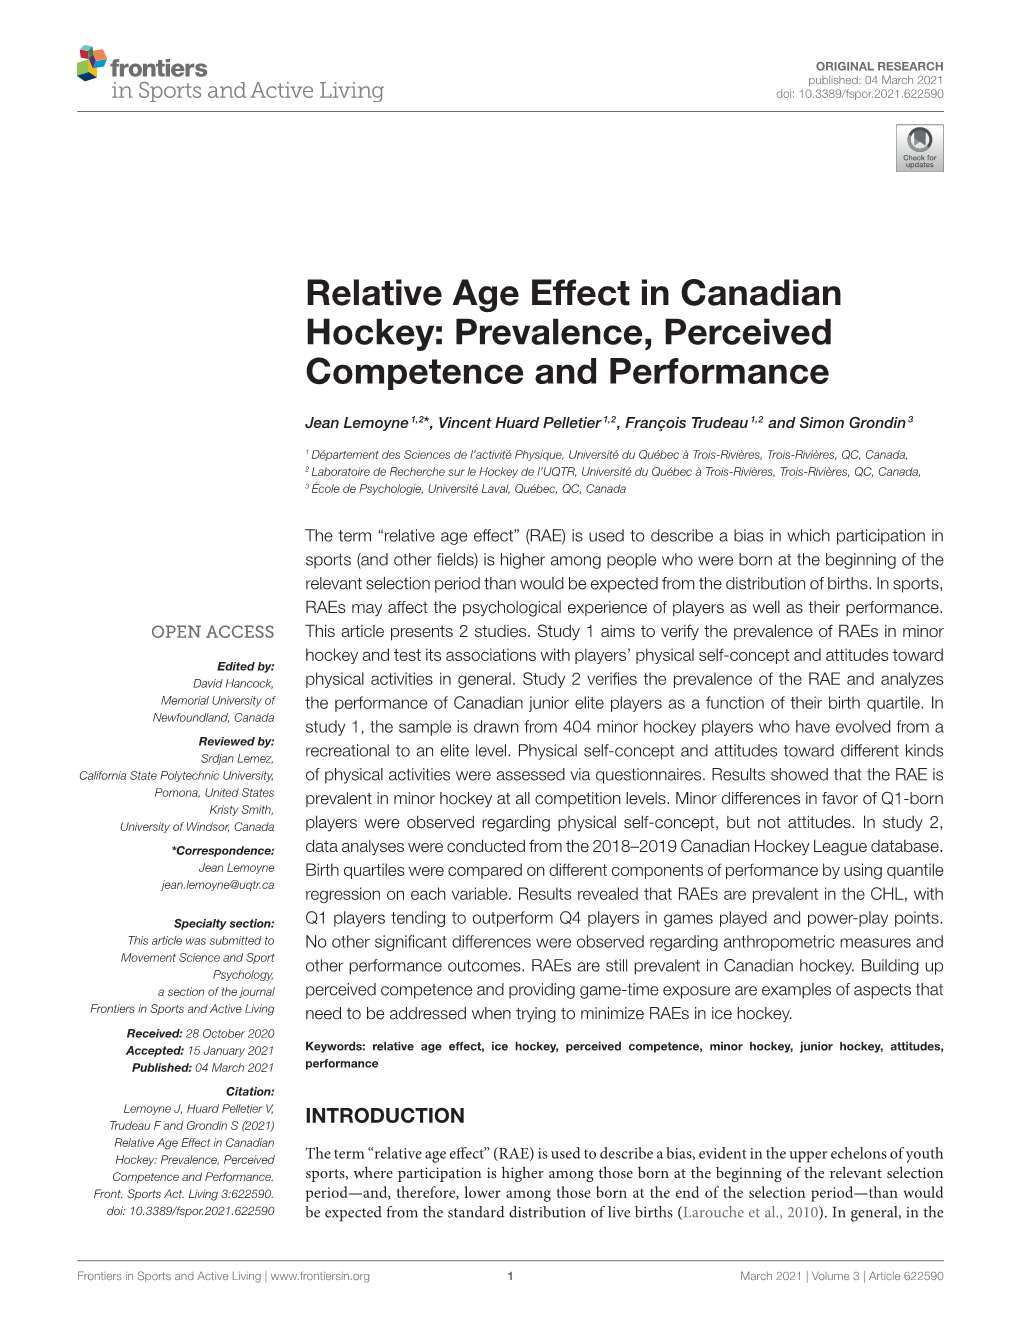 Relative Age Effect in Canadian Hockey: Prevalence, Perceived Competence and Performance